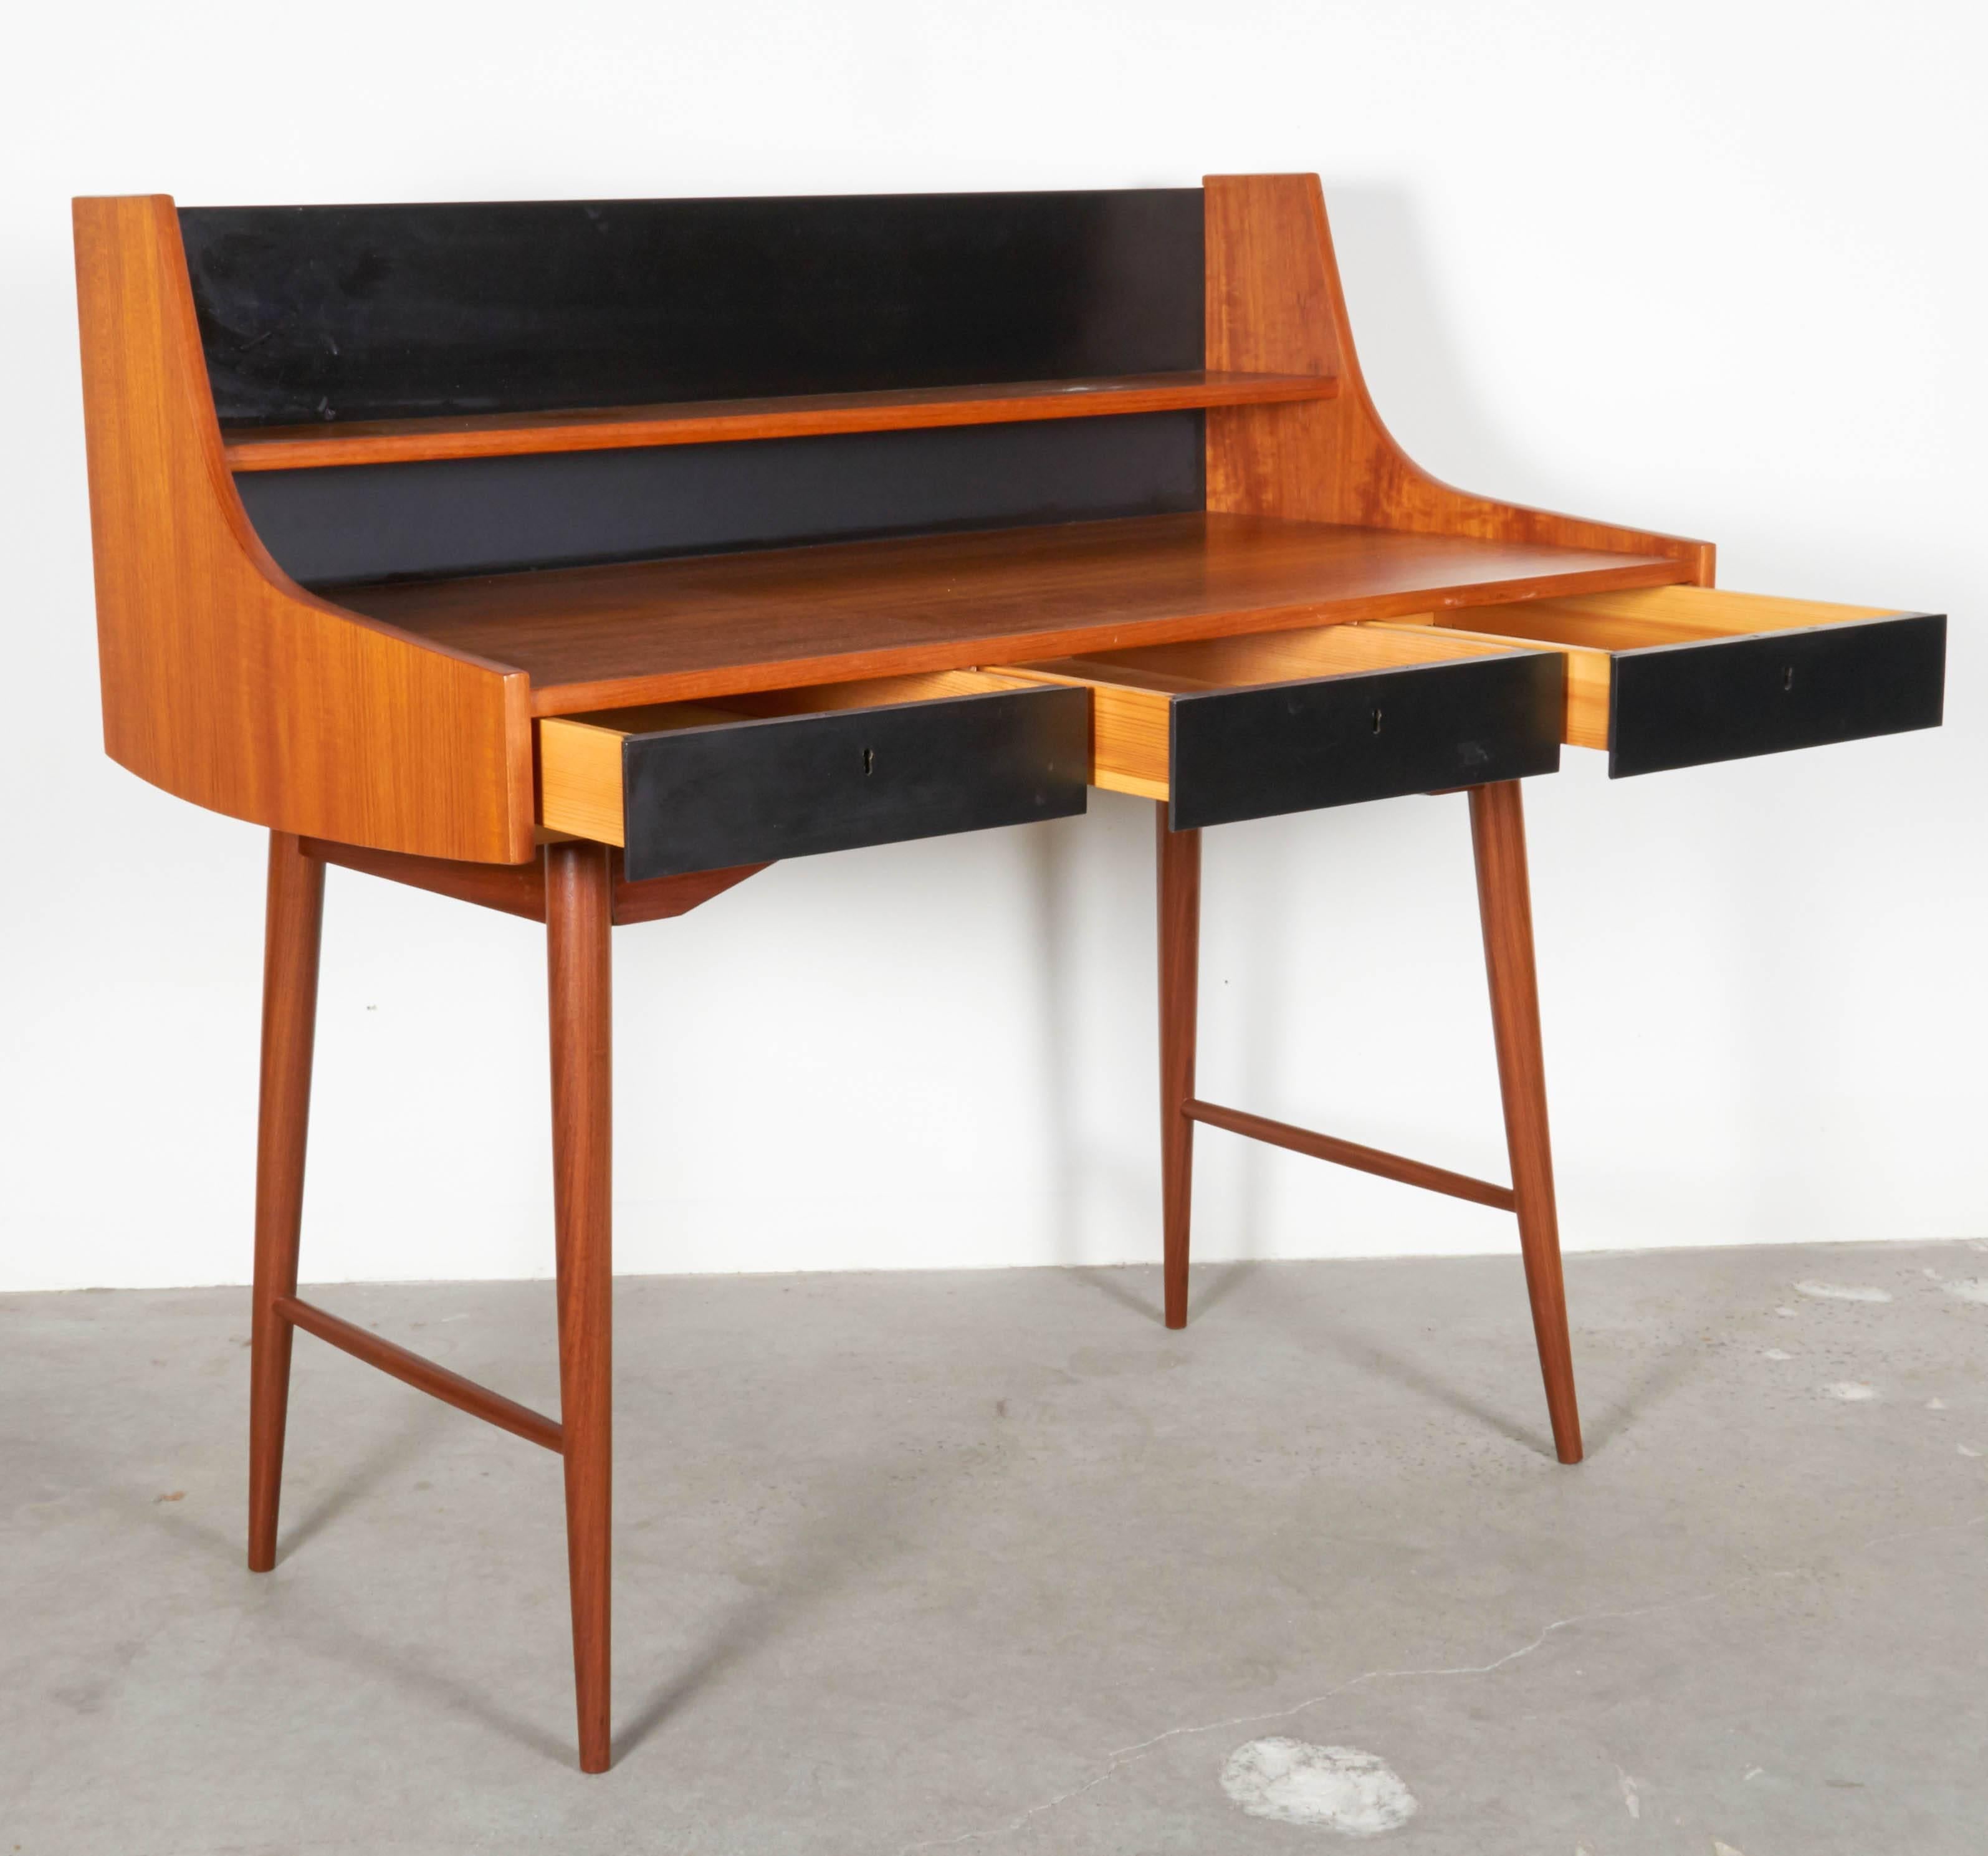 Vintage 1950s Writing Desk by John Texmon 

This writing desk is in like new condition. There are three black painted drawers side by side on the front. Middle draw locks and we have the key. The tranquil yet elegant design would be lovely in any